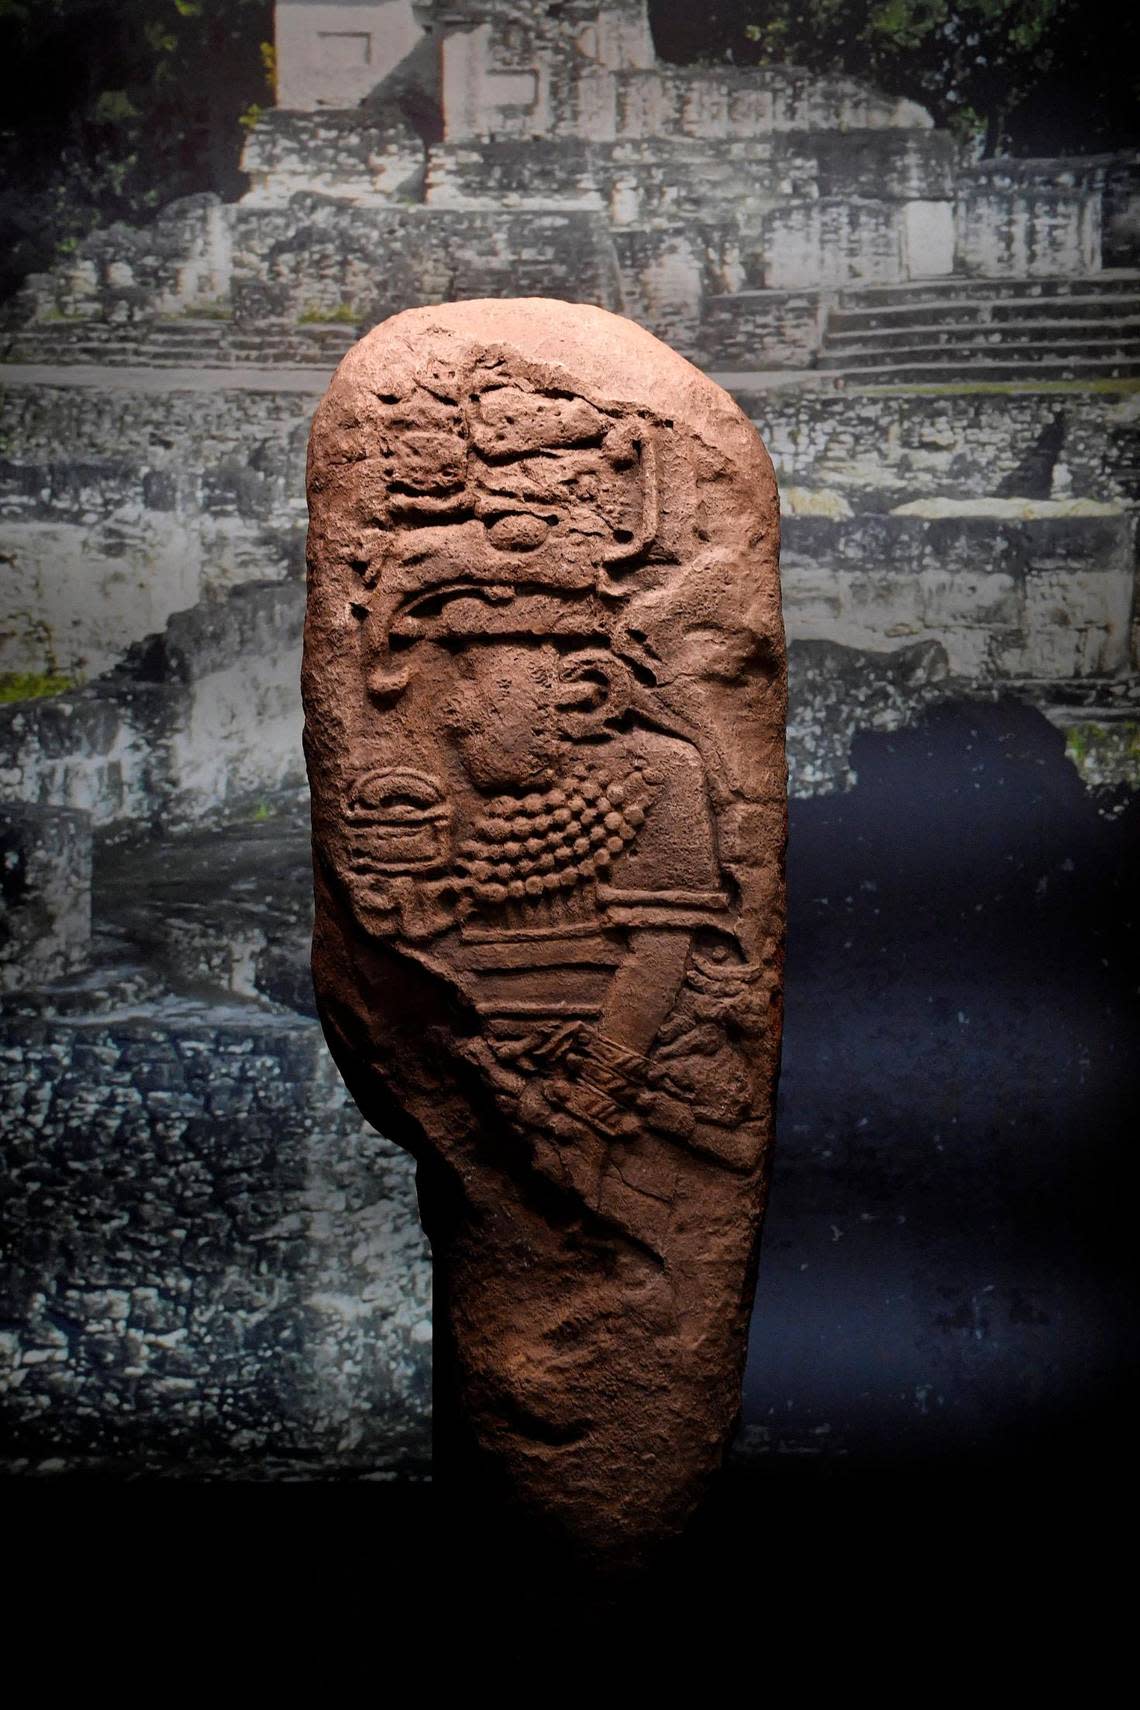 This stela was found at an archaeological site south of Tikal, Guatemala. It bears a dedication date which corresponds to Dec. 10, 435. The individual, possibly the ruler of El Zapote, holds a hieroglyph in his hand.